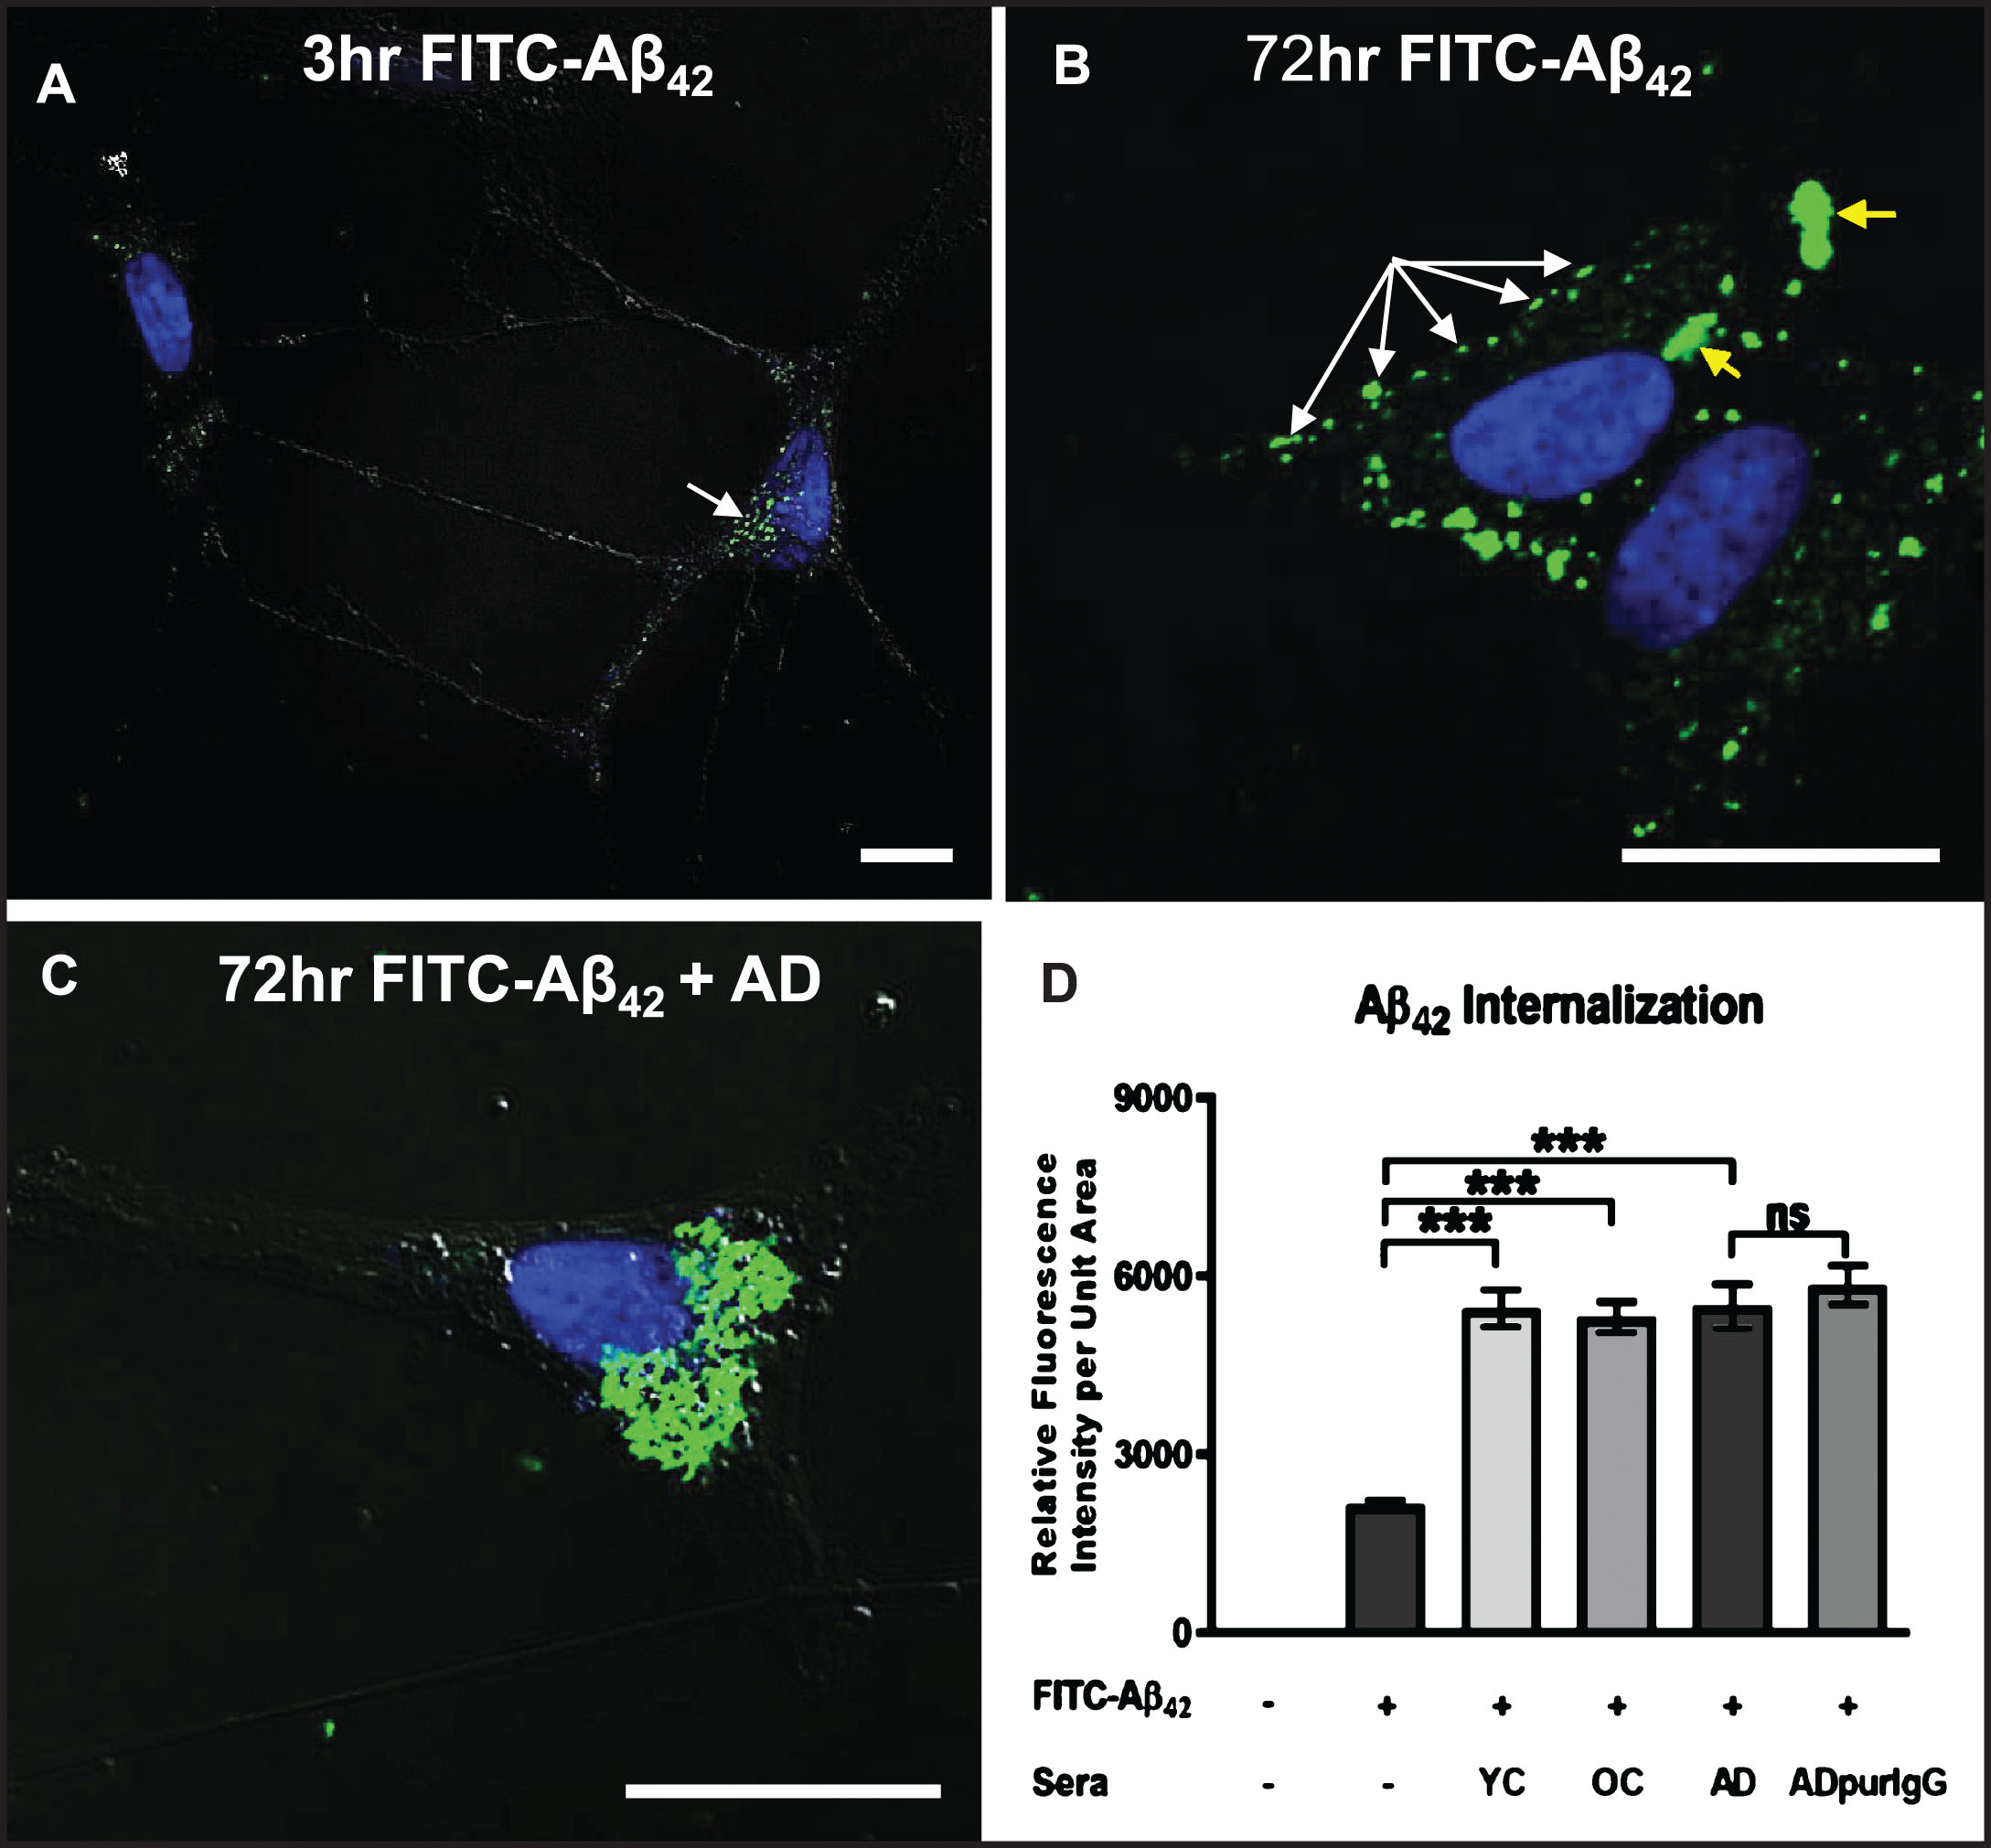 Internalization of exogenous Aβ42 is enhanced by binding of IgG autoantibodies. A, B) Differentiated SH-SY5Y cells treated with a physiologically relevant dose (100 nM) of FITC-labeled Aβ42 for 3 and 72 h in medium without human serum showing that Aβ42 internalization can occur in the absence of serum. A) At 3 h, FITC-Aβ42 was localized to small, dispersed and uniformly sized granules. B) As is typically seen in Aβ42-overburdened neurons in regions with AD pathology, a significant fraction of internalized Aβ42 was concentrated within aggregates at 72 h. C) Addition of AD serum to media containing 100 nM FITC-Aβ42 increased the rate and extent of Aβ42 internalization with very little detected on the cell surface. D) Quantification of the effects of different human sera on the rate and extent of FITC-Aβ42 internalization after 72 h of treatment. Exposure of differentiated SH-SY5Y cells to 100 nM FITC-labeled Aβ42 in media without serum (controls) resulted in detection of a relatively low level of intracellular Aβ42. Addition of human serum to the media greatly increased the rate and extent of FITC-labeled Aβ42 internalization observed at 72 h. Comparison of the effects of serum from an AD patient, an age-matched non-demented subject, and a younger non-demented control individual revealed no significant differences in the amount of Aβ42 accumulation over 72 h, and intracellular Aβ42 levels in these groups were all significantly higher than in cells treated with Aβ42 alone. In addition, IgG purified from AD serum showed comparable Aβ42 internalization rates to that of whole serum, suggesting that, among serum components, IgG is largely responsible for the observed Aβ42 internalization in SH-SY5Y cells. Scale bar = 10 μm. ***p < 0.001. AD, Alzheimer’s disease serum; OC, old-aged matched, non-demented control; YC, young-aged, non-demented control; ADpurIgG, purified IgG from AD sera; white arrow, newly internalized/plasma-membrane bound Aβ42; yellow arrow, aggregates of Aβ42-containing granules.